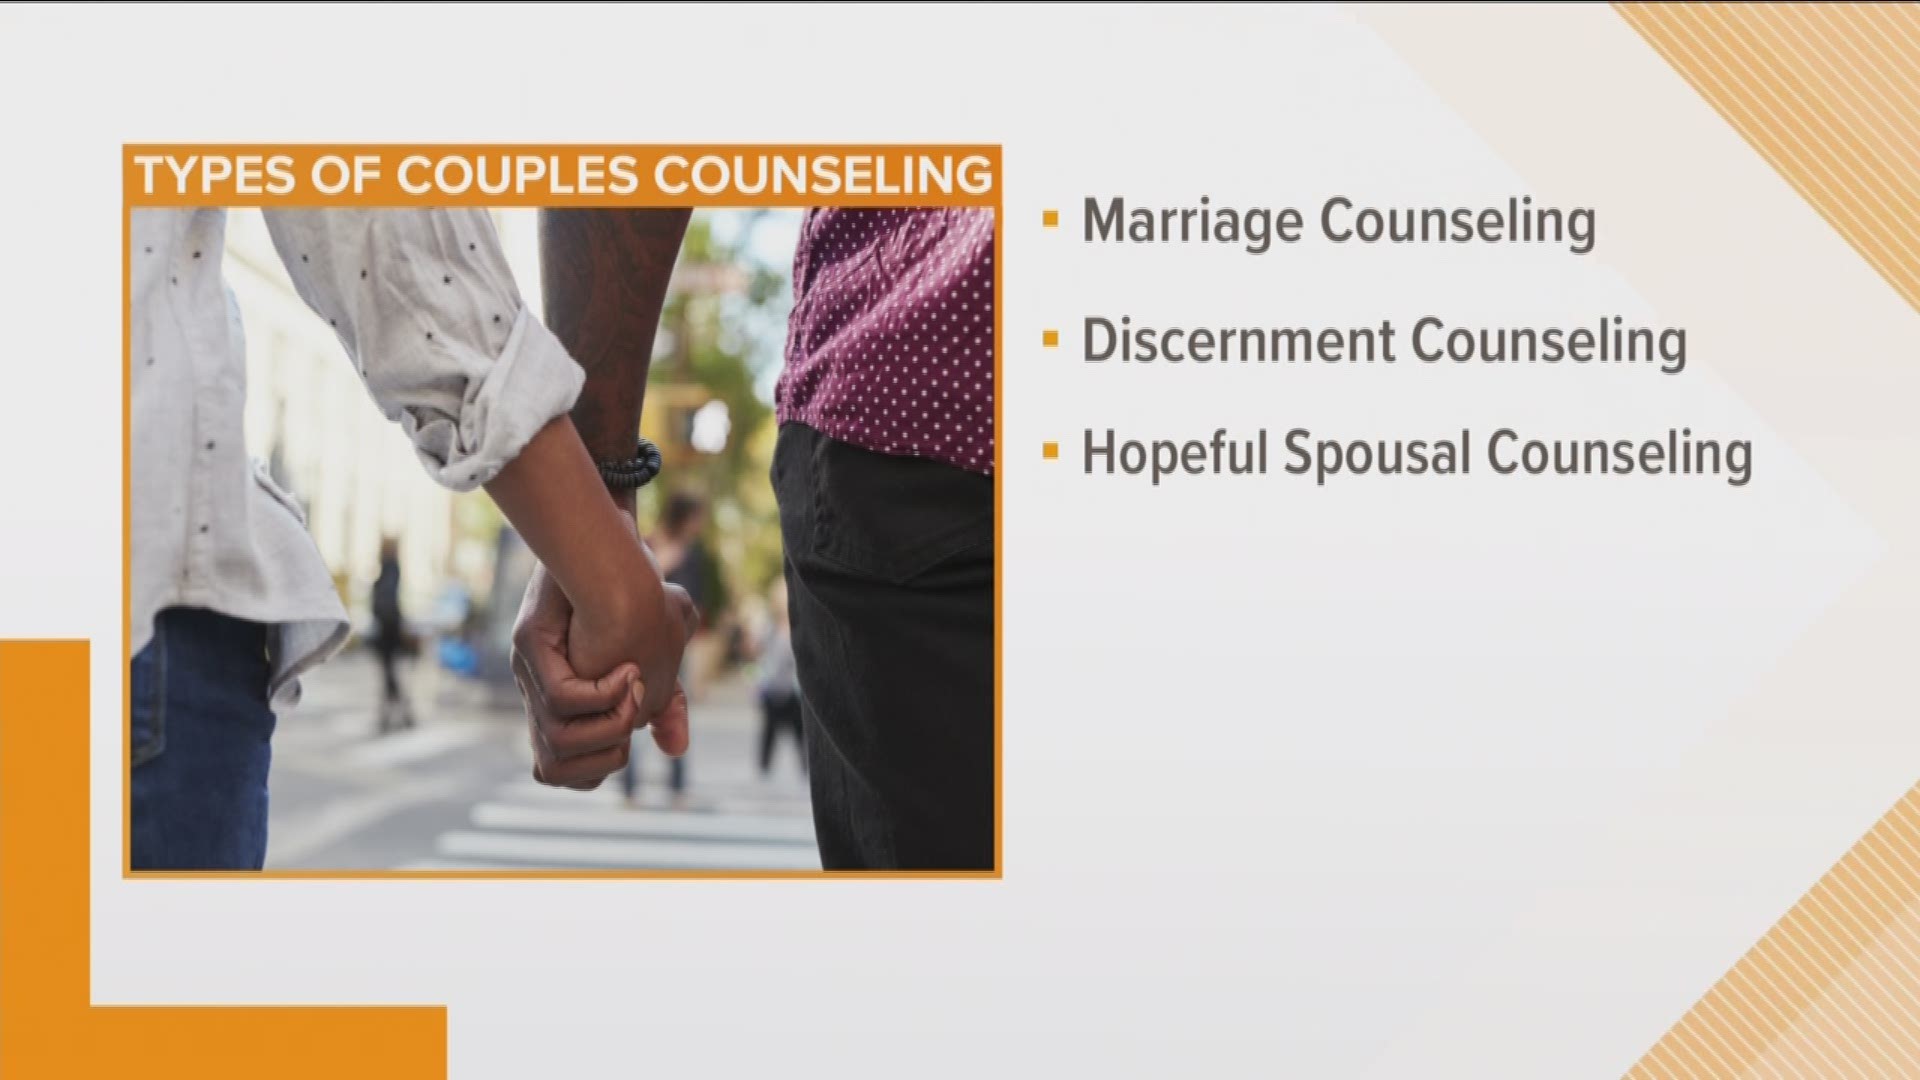 Charlie Simpson is here discussing different types of couples counseling.